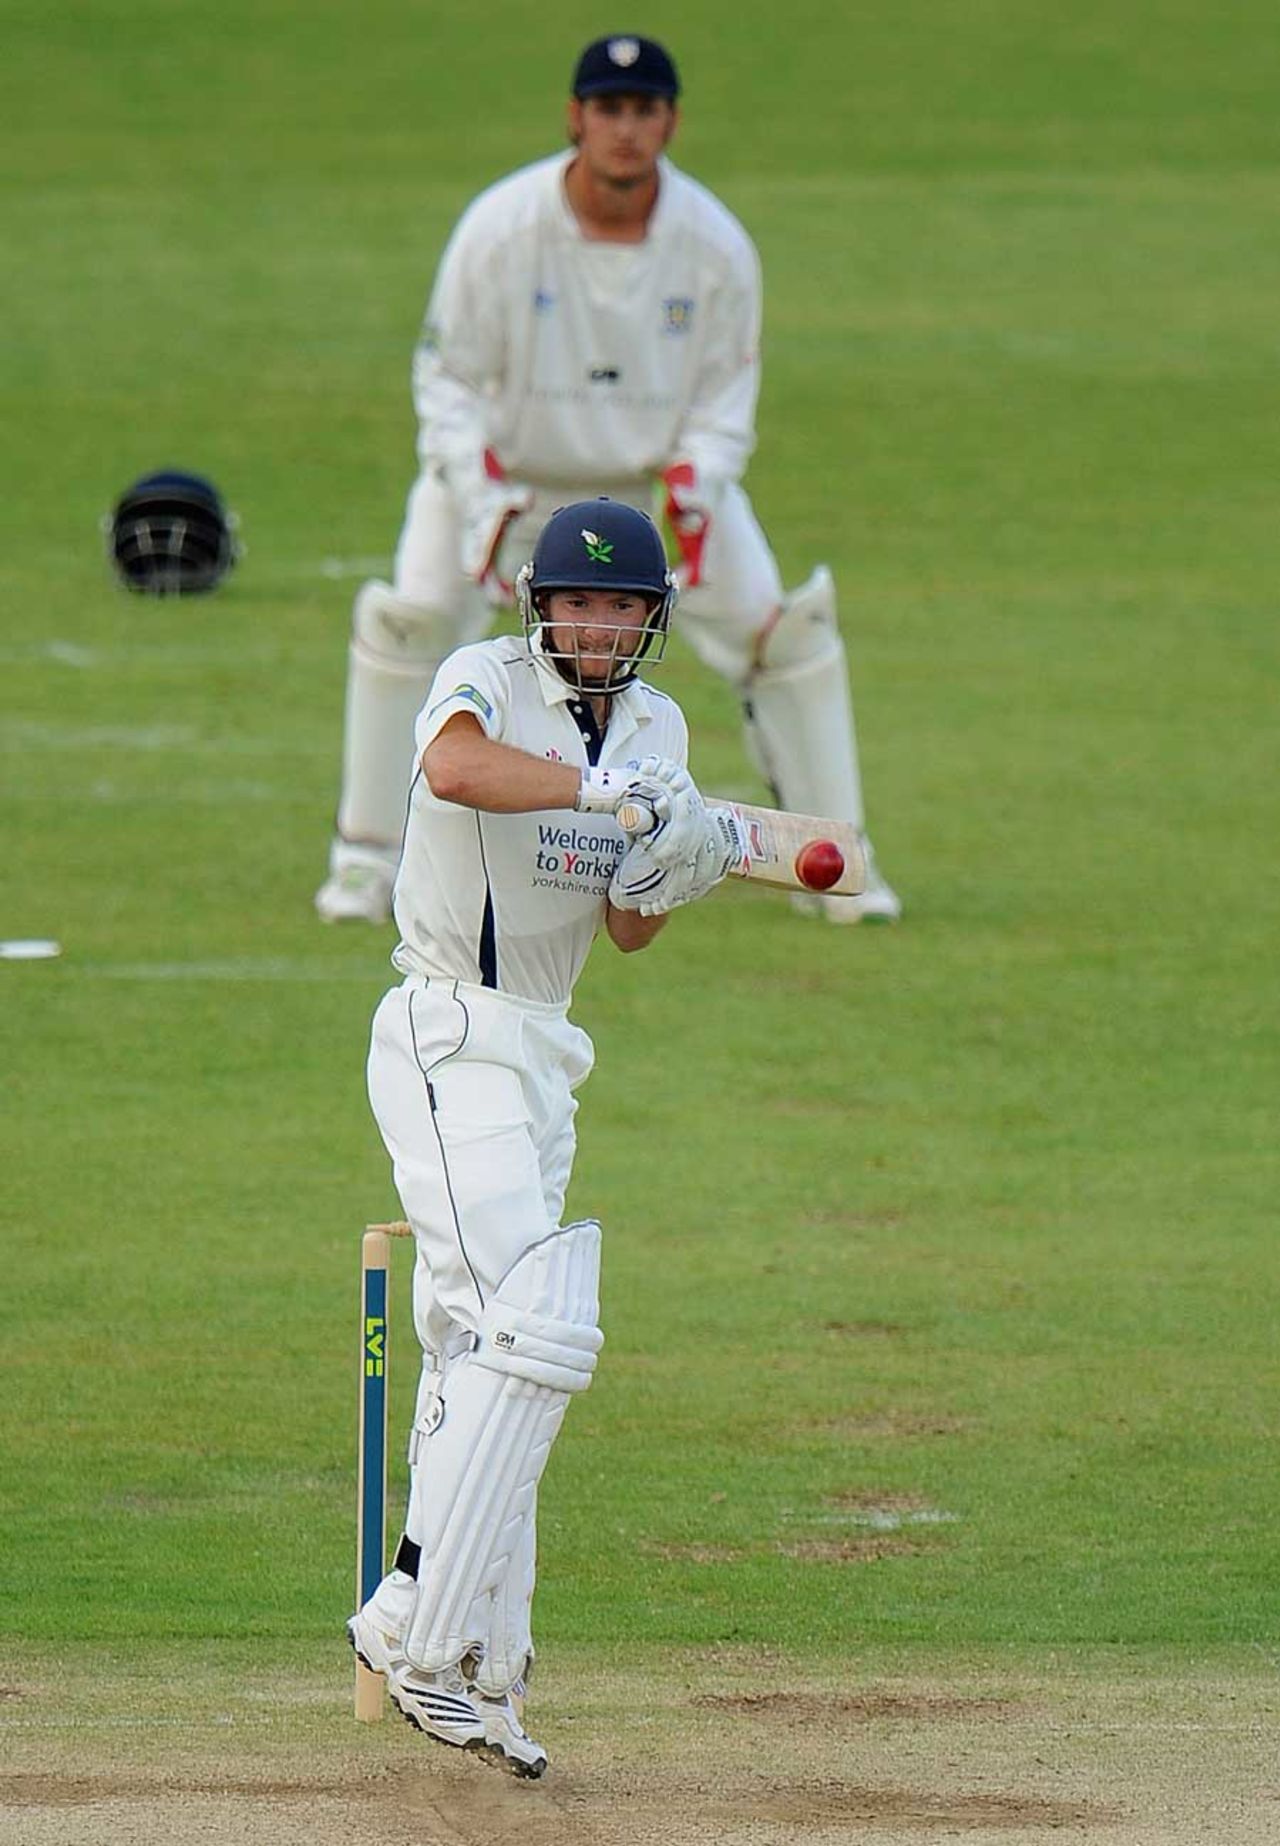 Adam Lyth got the Yorkshire chase off to a good start with 48, Durham v Yorkshire, County Championship, Division One, Chester-le-Street, August 18, 2010